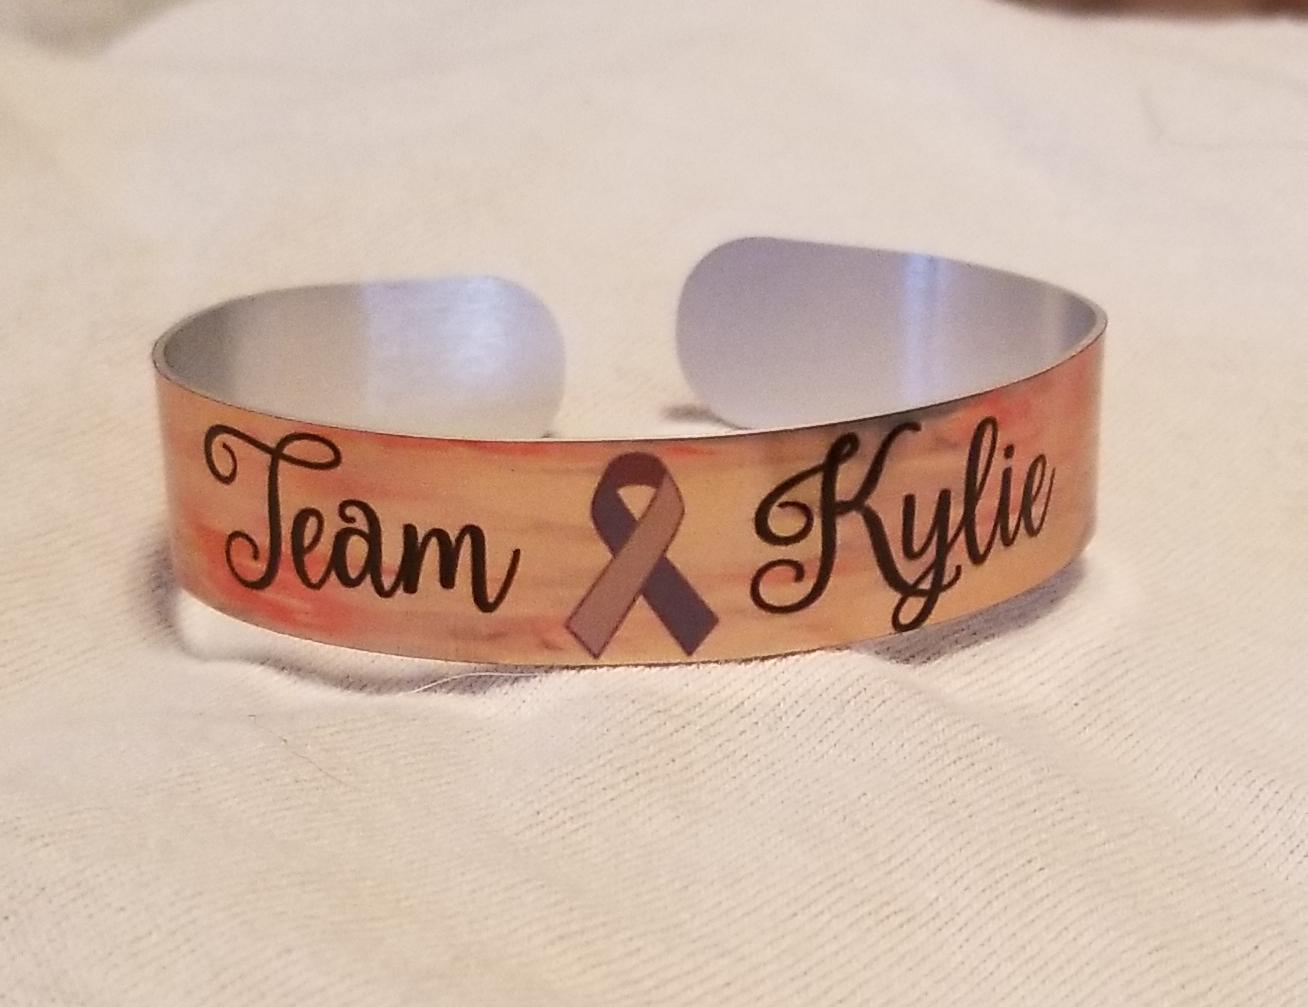 I made these for my niece when she had cancer. Family and friends donated money to help with he